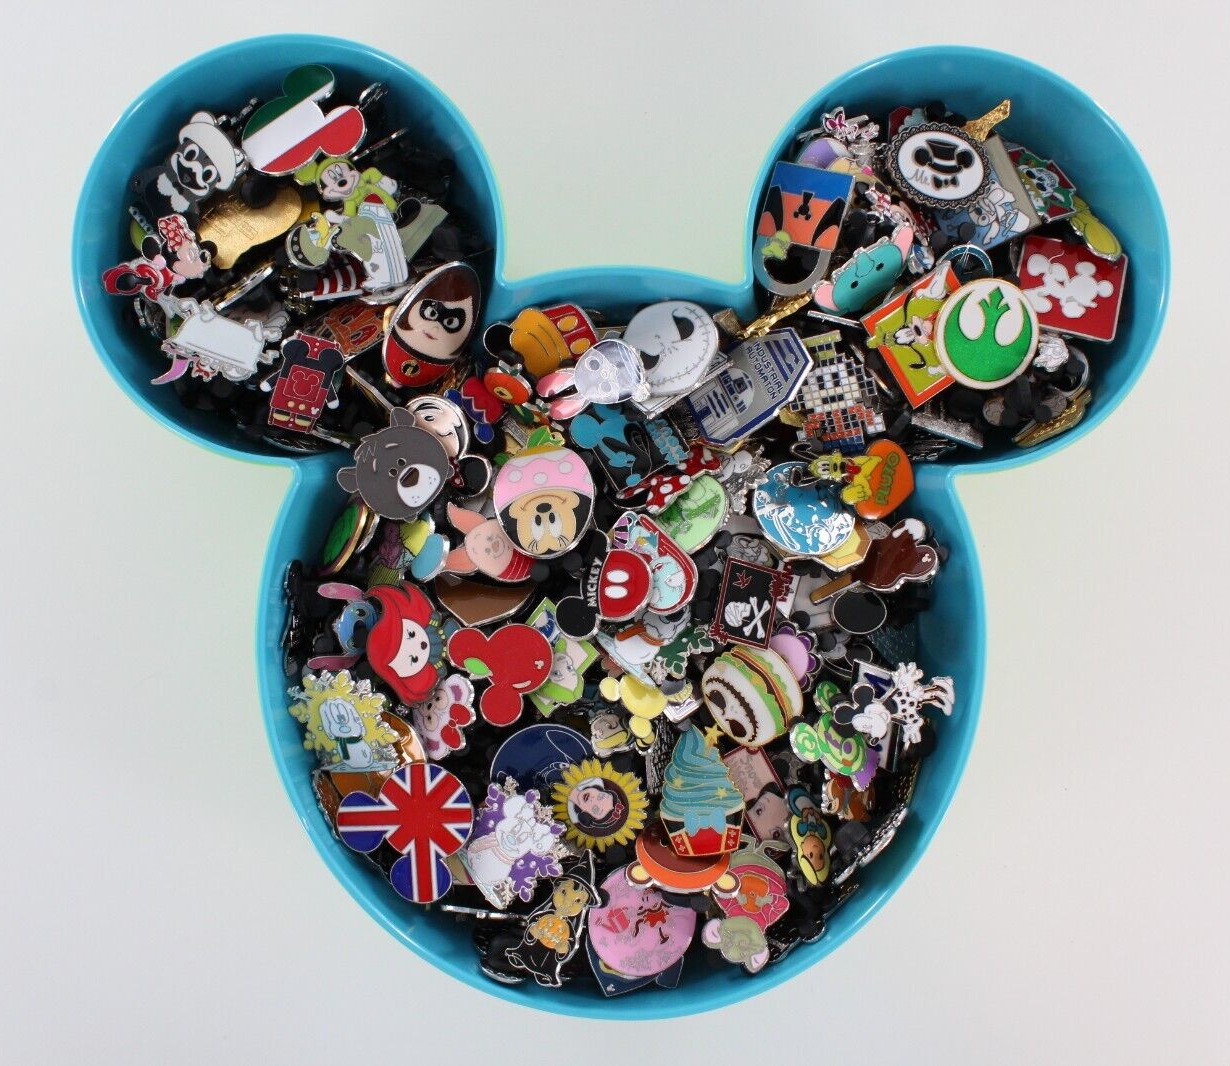 Disney Pins Lot You Pick Size From 1-100  Up to 500 pieces with NO DOUBLES